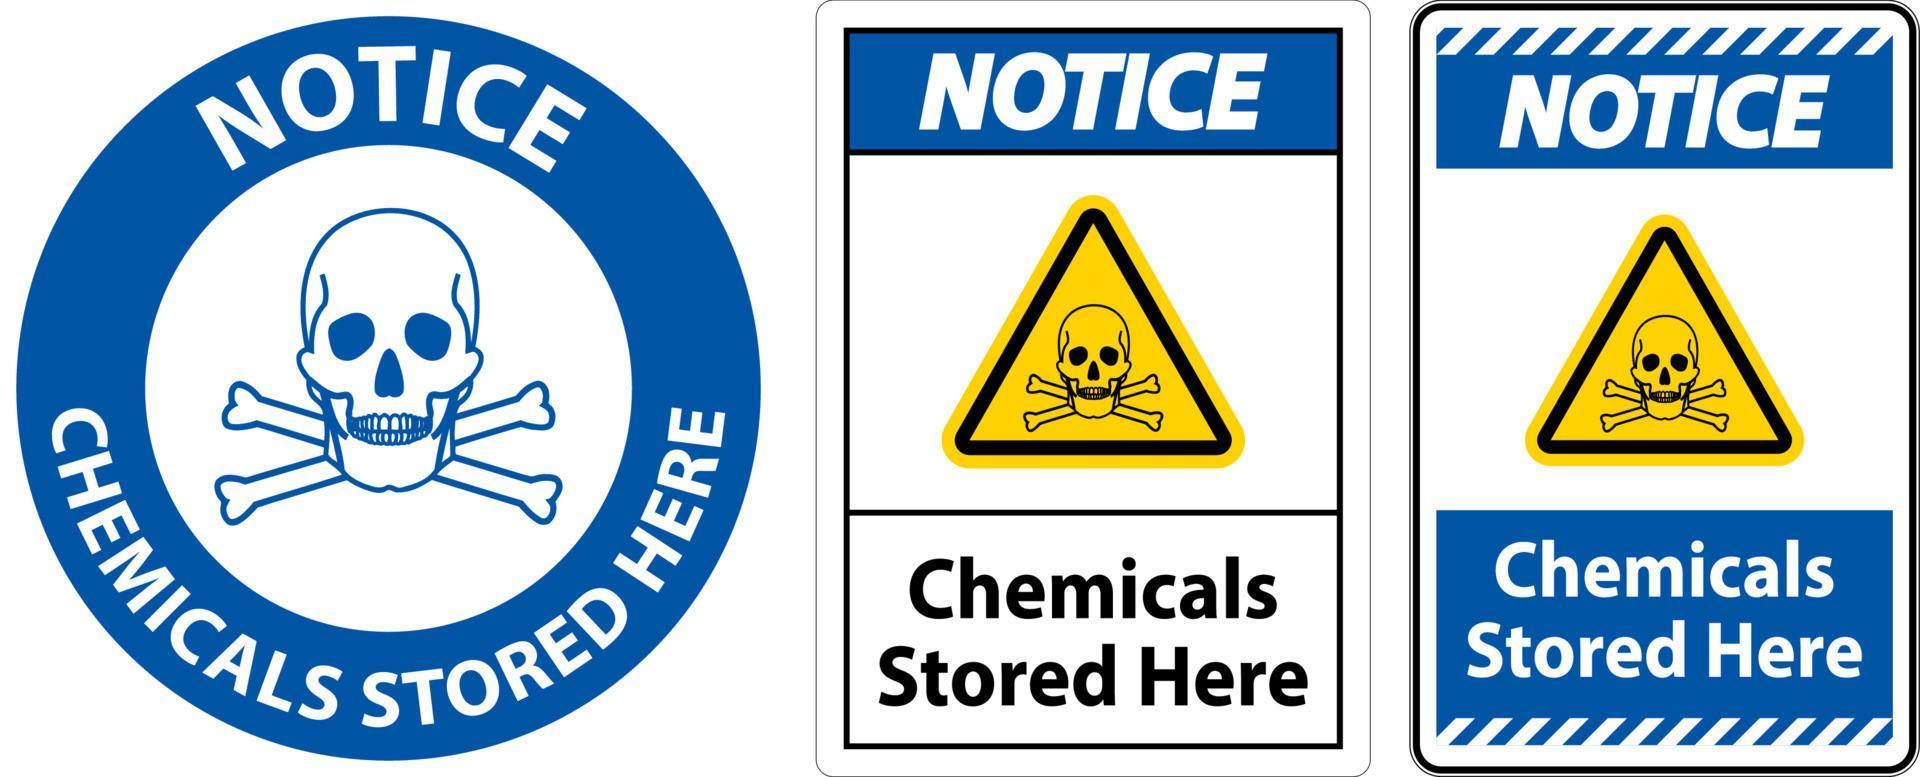 Notice Chemicals Stored Here Sign On White Background vector